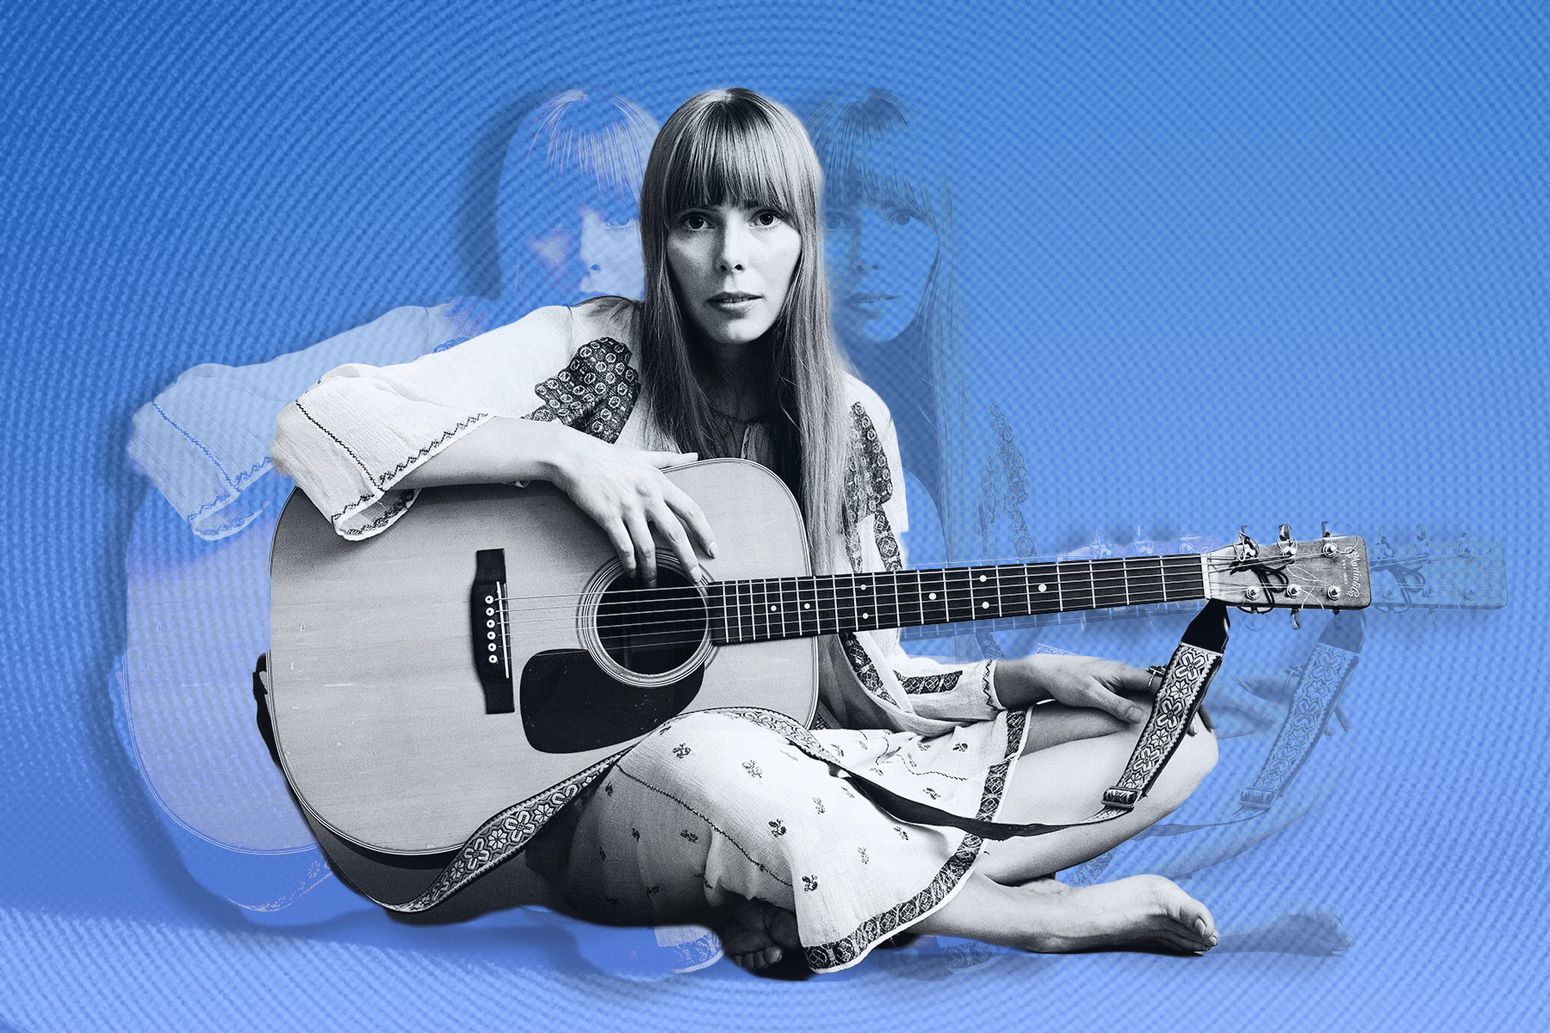 What Instruments Does Singer/Songwriter Joni Mitchell Feature On Her 1971 Album “Blue”?